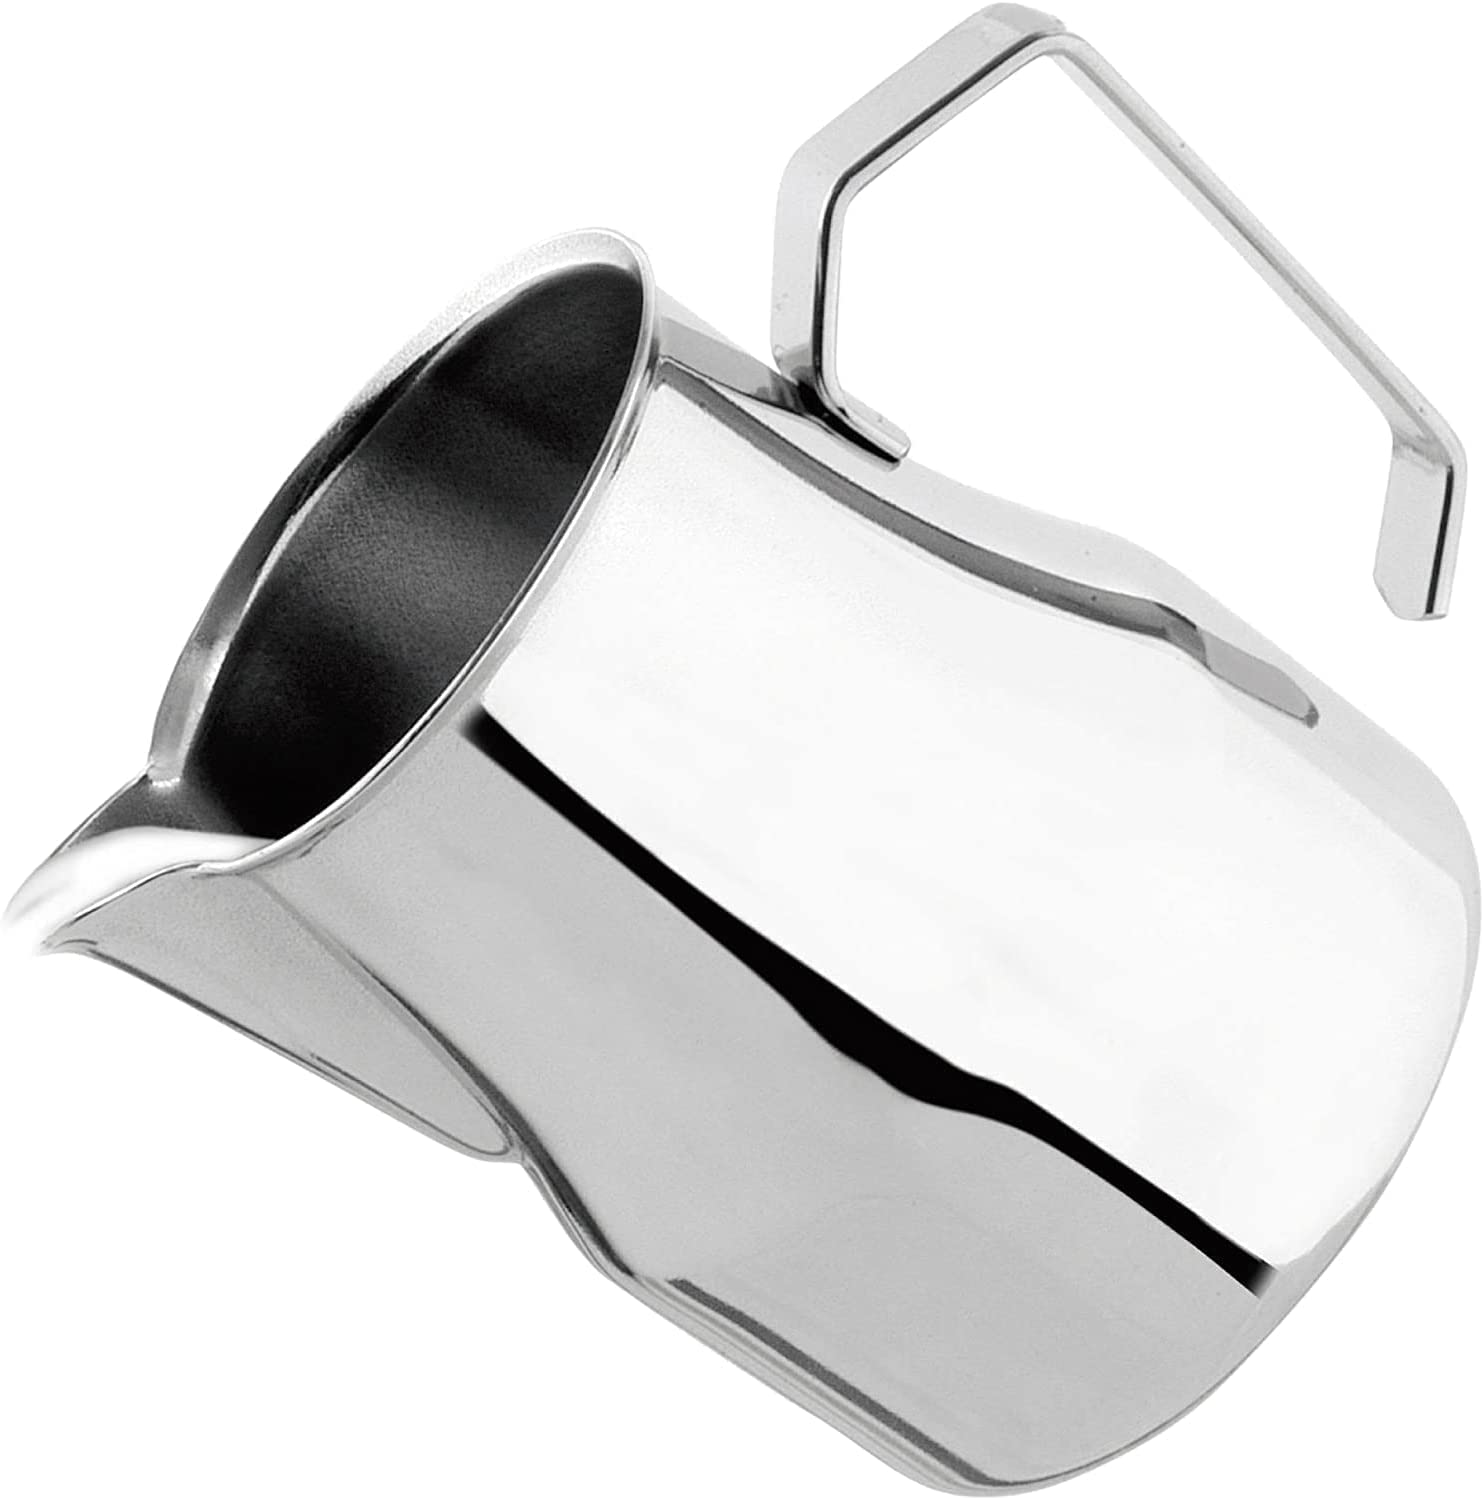 Stainless Steel Milk Jug Special Latte Capuccino Art Spout - Made In Italy By Motta (750 ML)